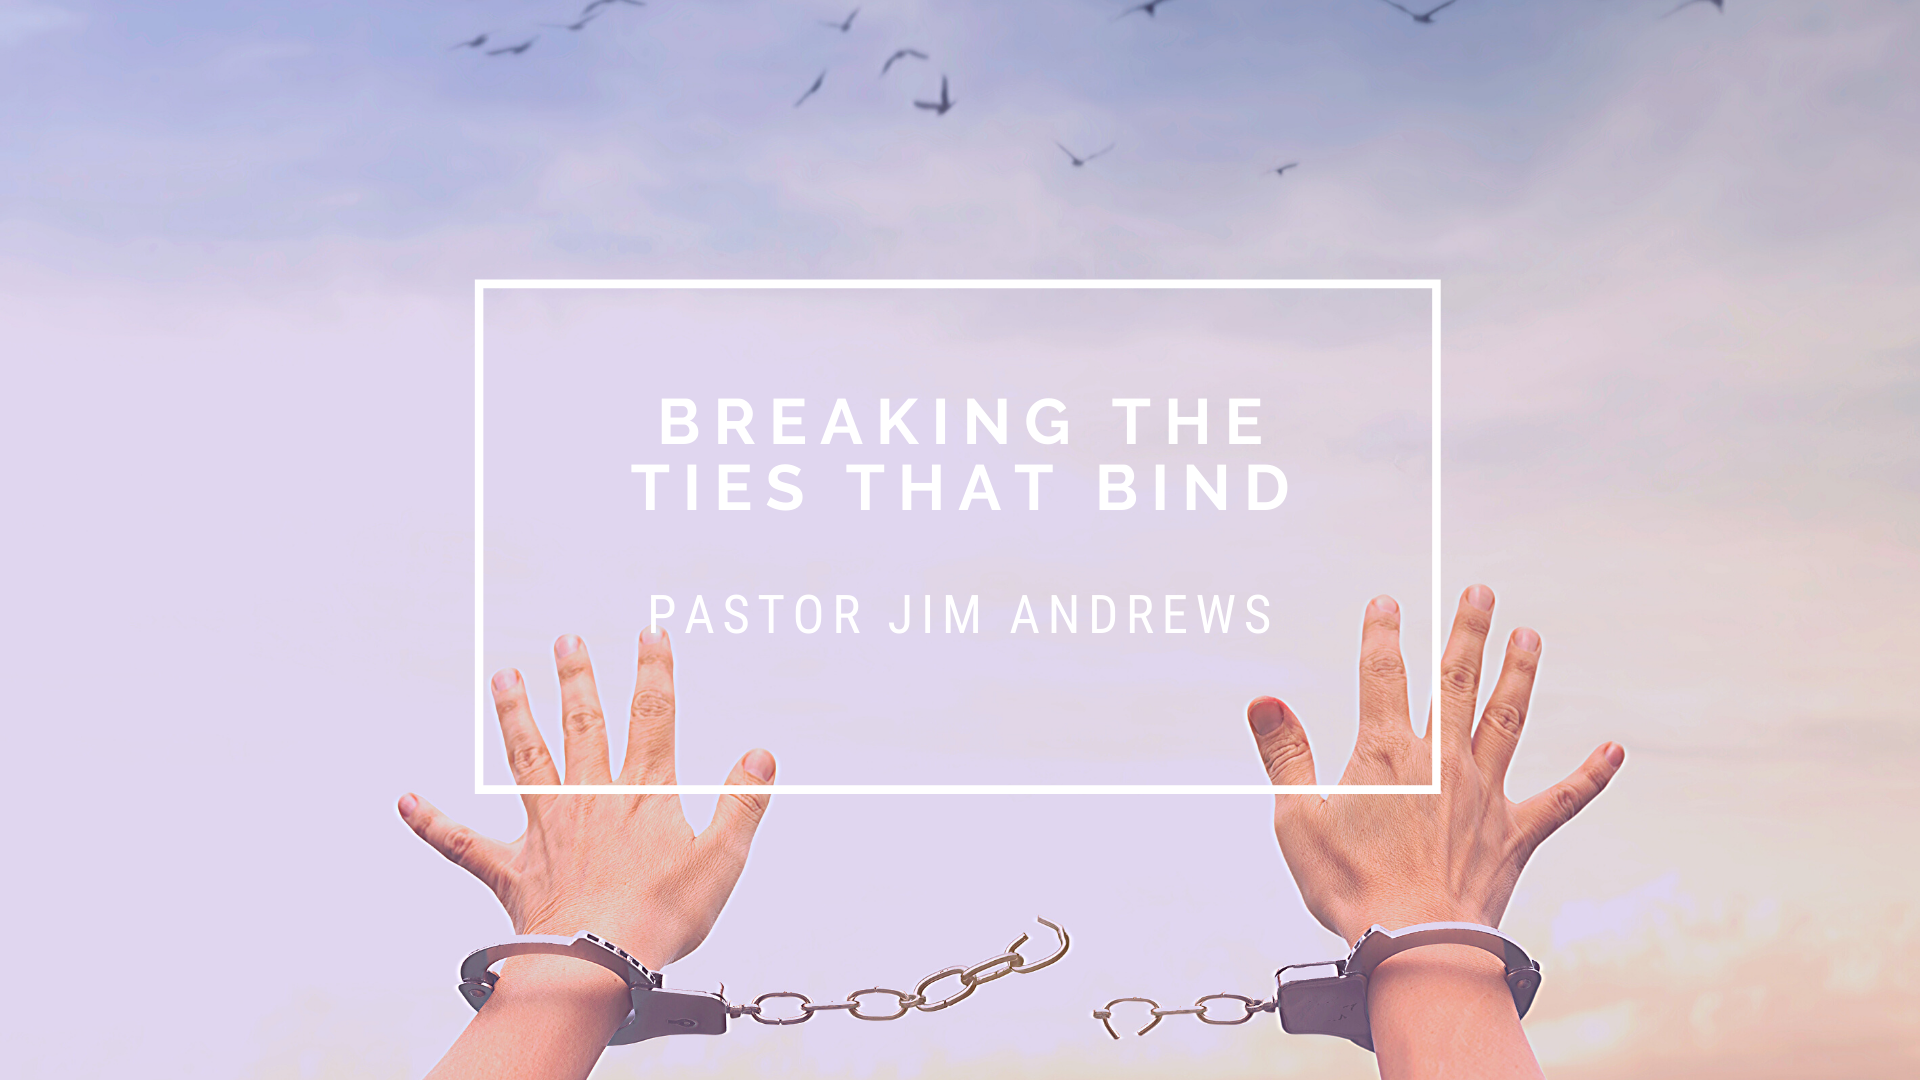 Breaking the Ties that Bind:  Live Like You Have Something to Prove – 2 Peter 1:2-11